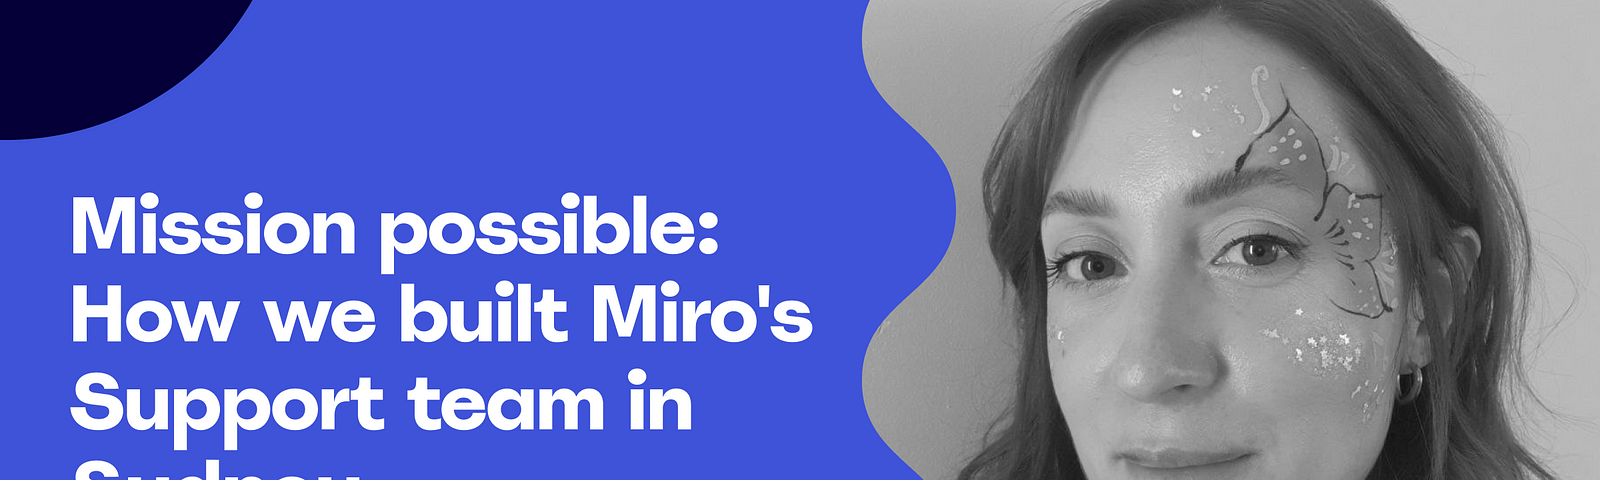 Mission possible: How we built Miro’s Support team in Sydney, by Victoria Zabolotnykh